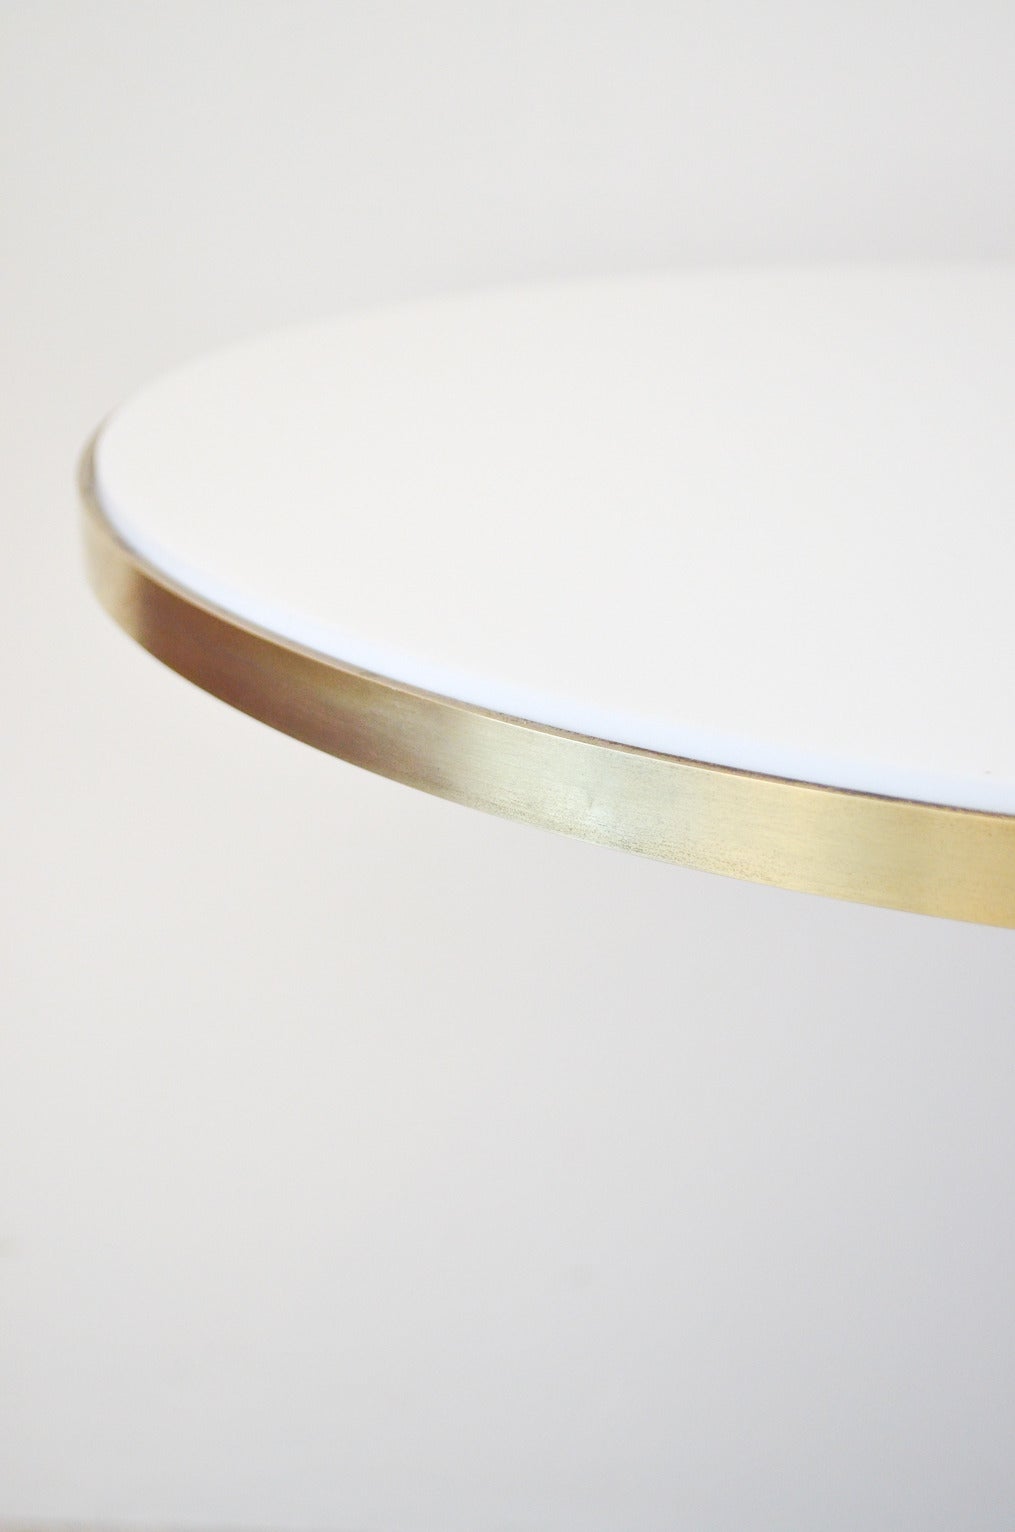 American Exquisite Brass and Vitrolite Side Table by Paul McCobb